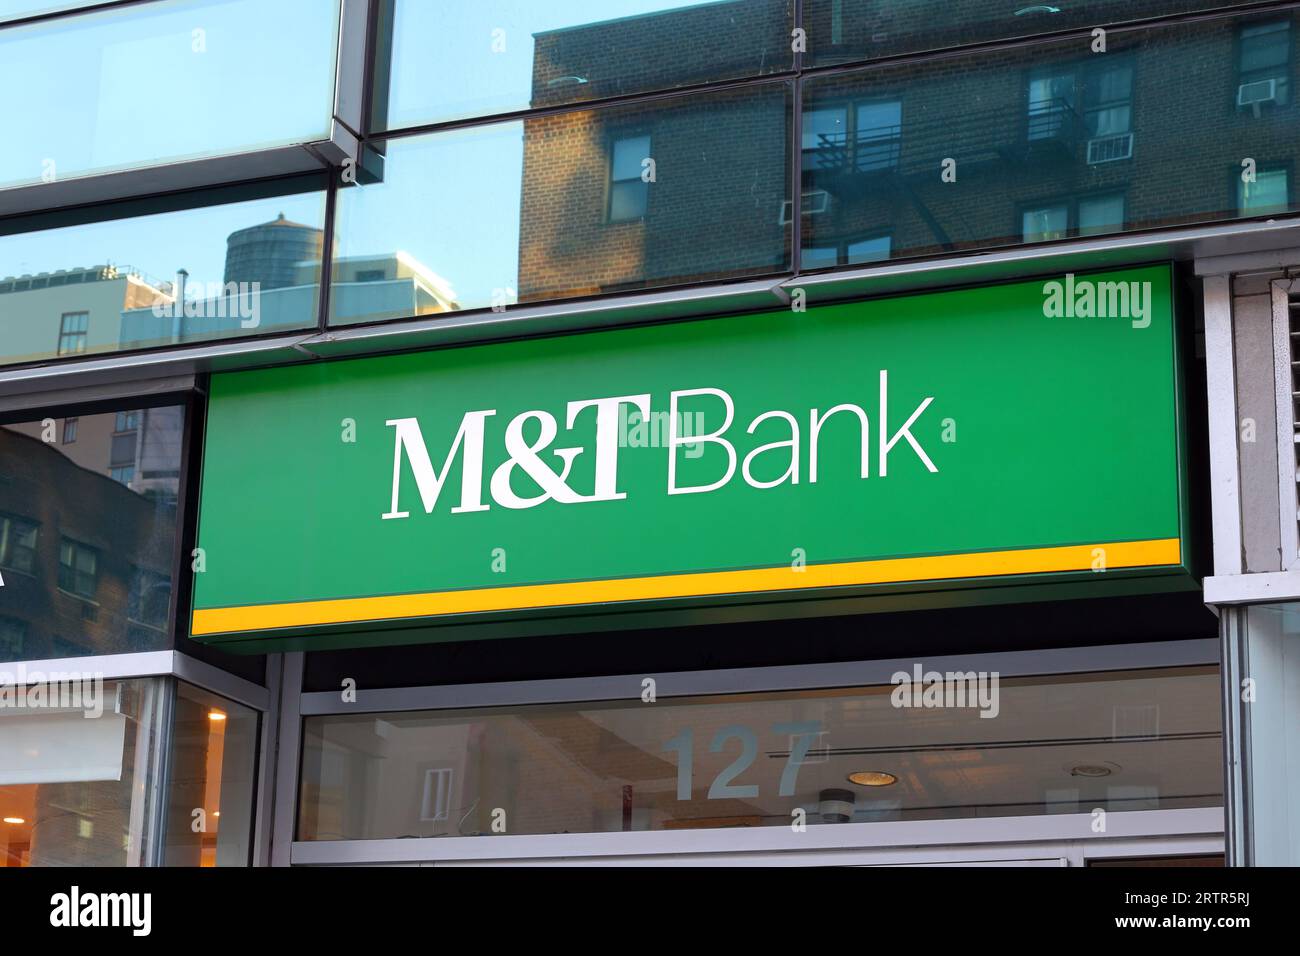 Signage for M&T Bank, a bank based in Eastern USA, at one of their locations in the Chelsea neighborhood in New York City. Stock Photo